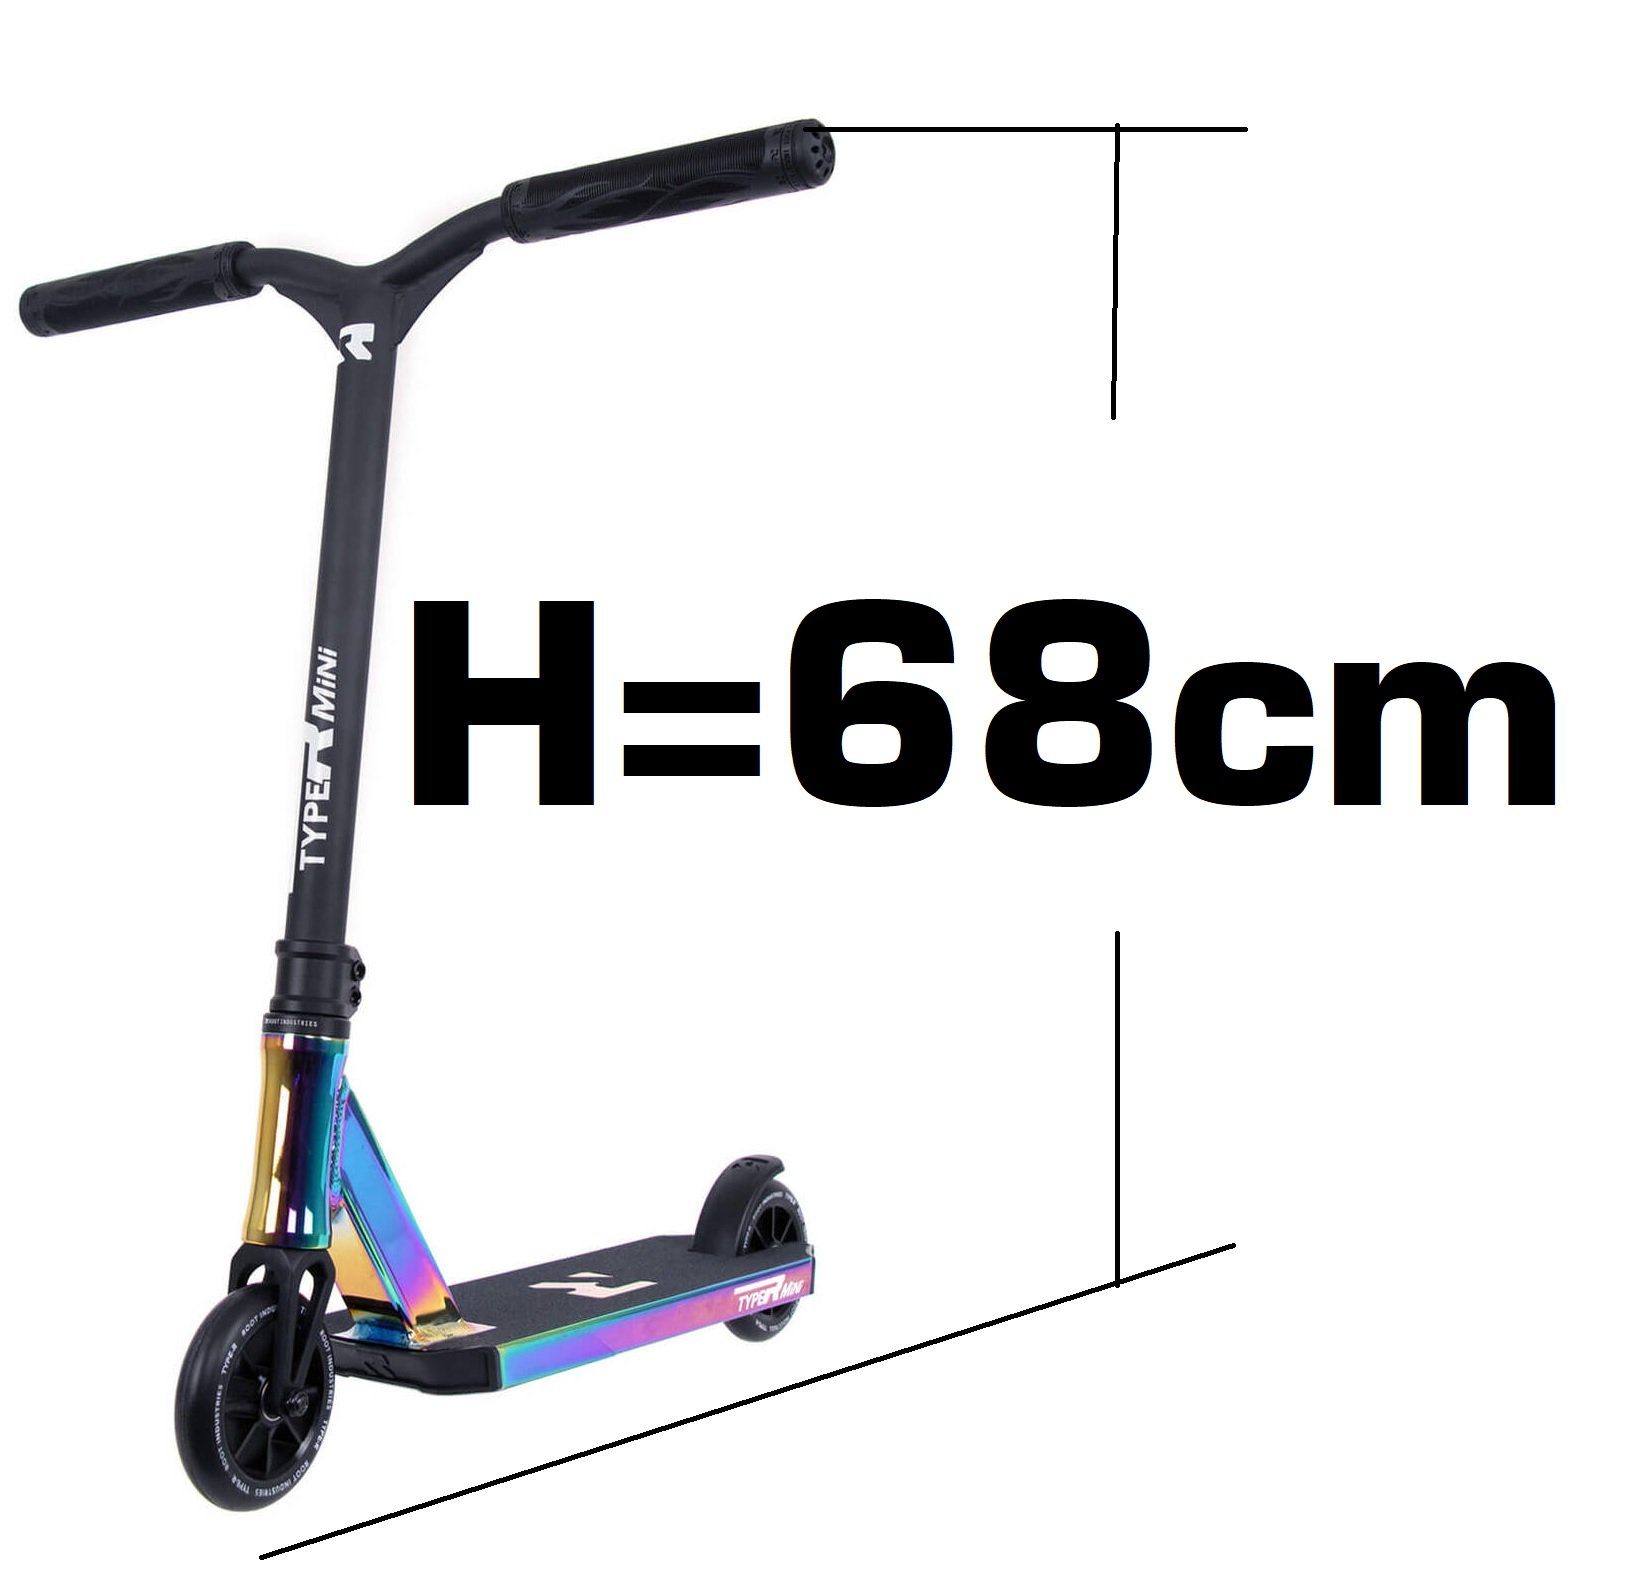 Root Industries Stuntscooter Root R Industries Mini Neochrom Stunt-Scooter Type H=68cm